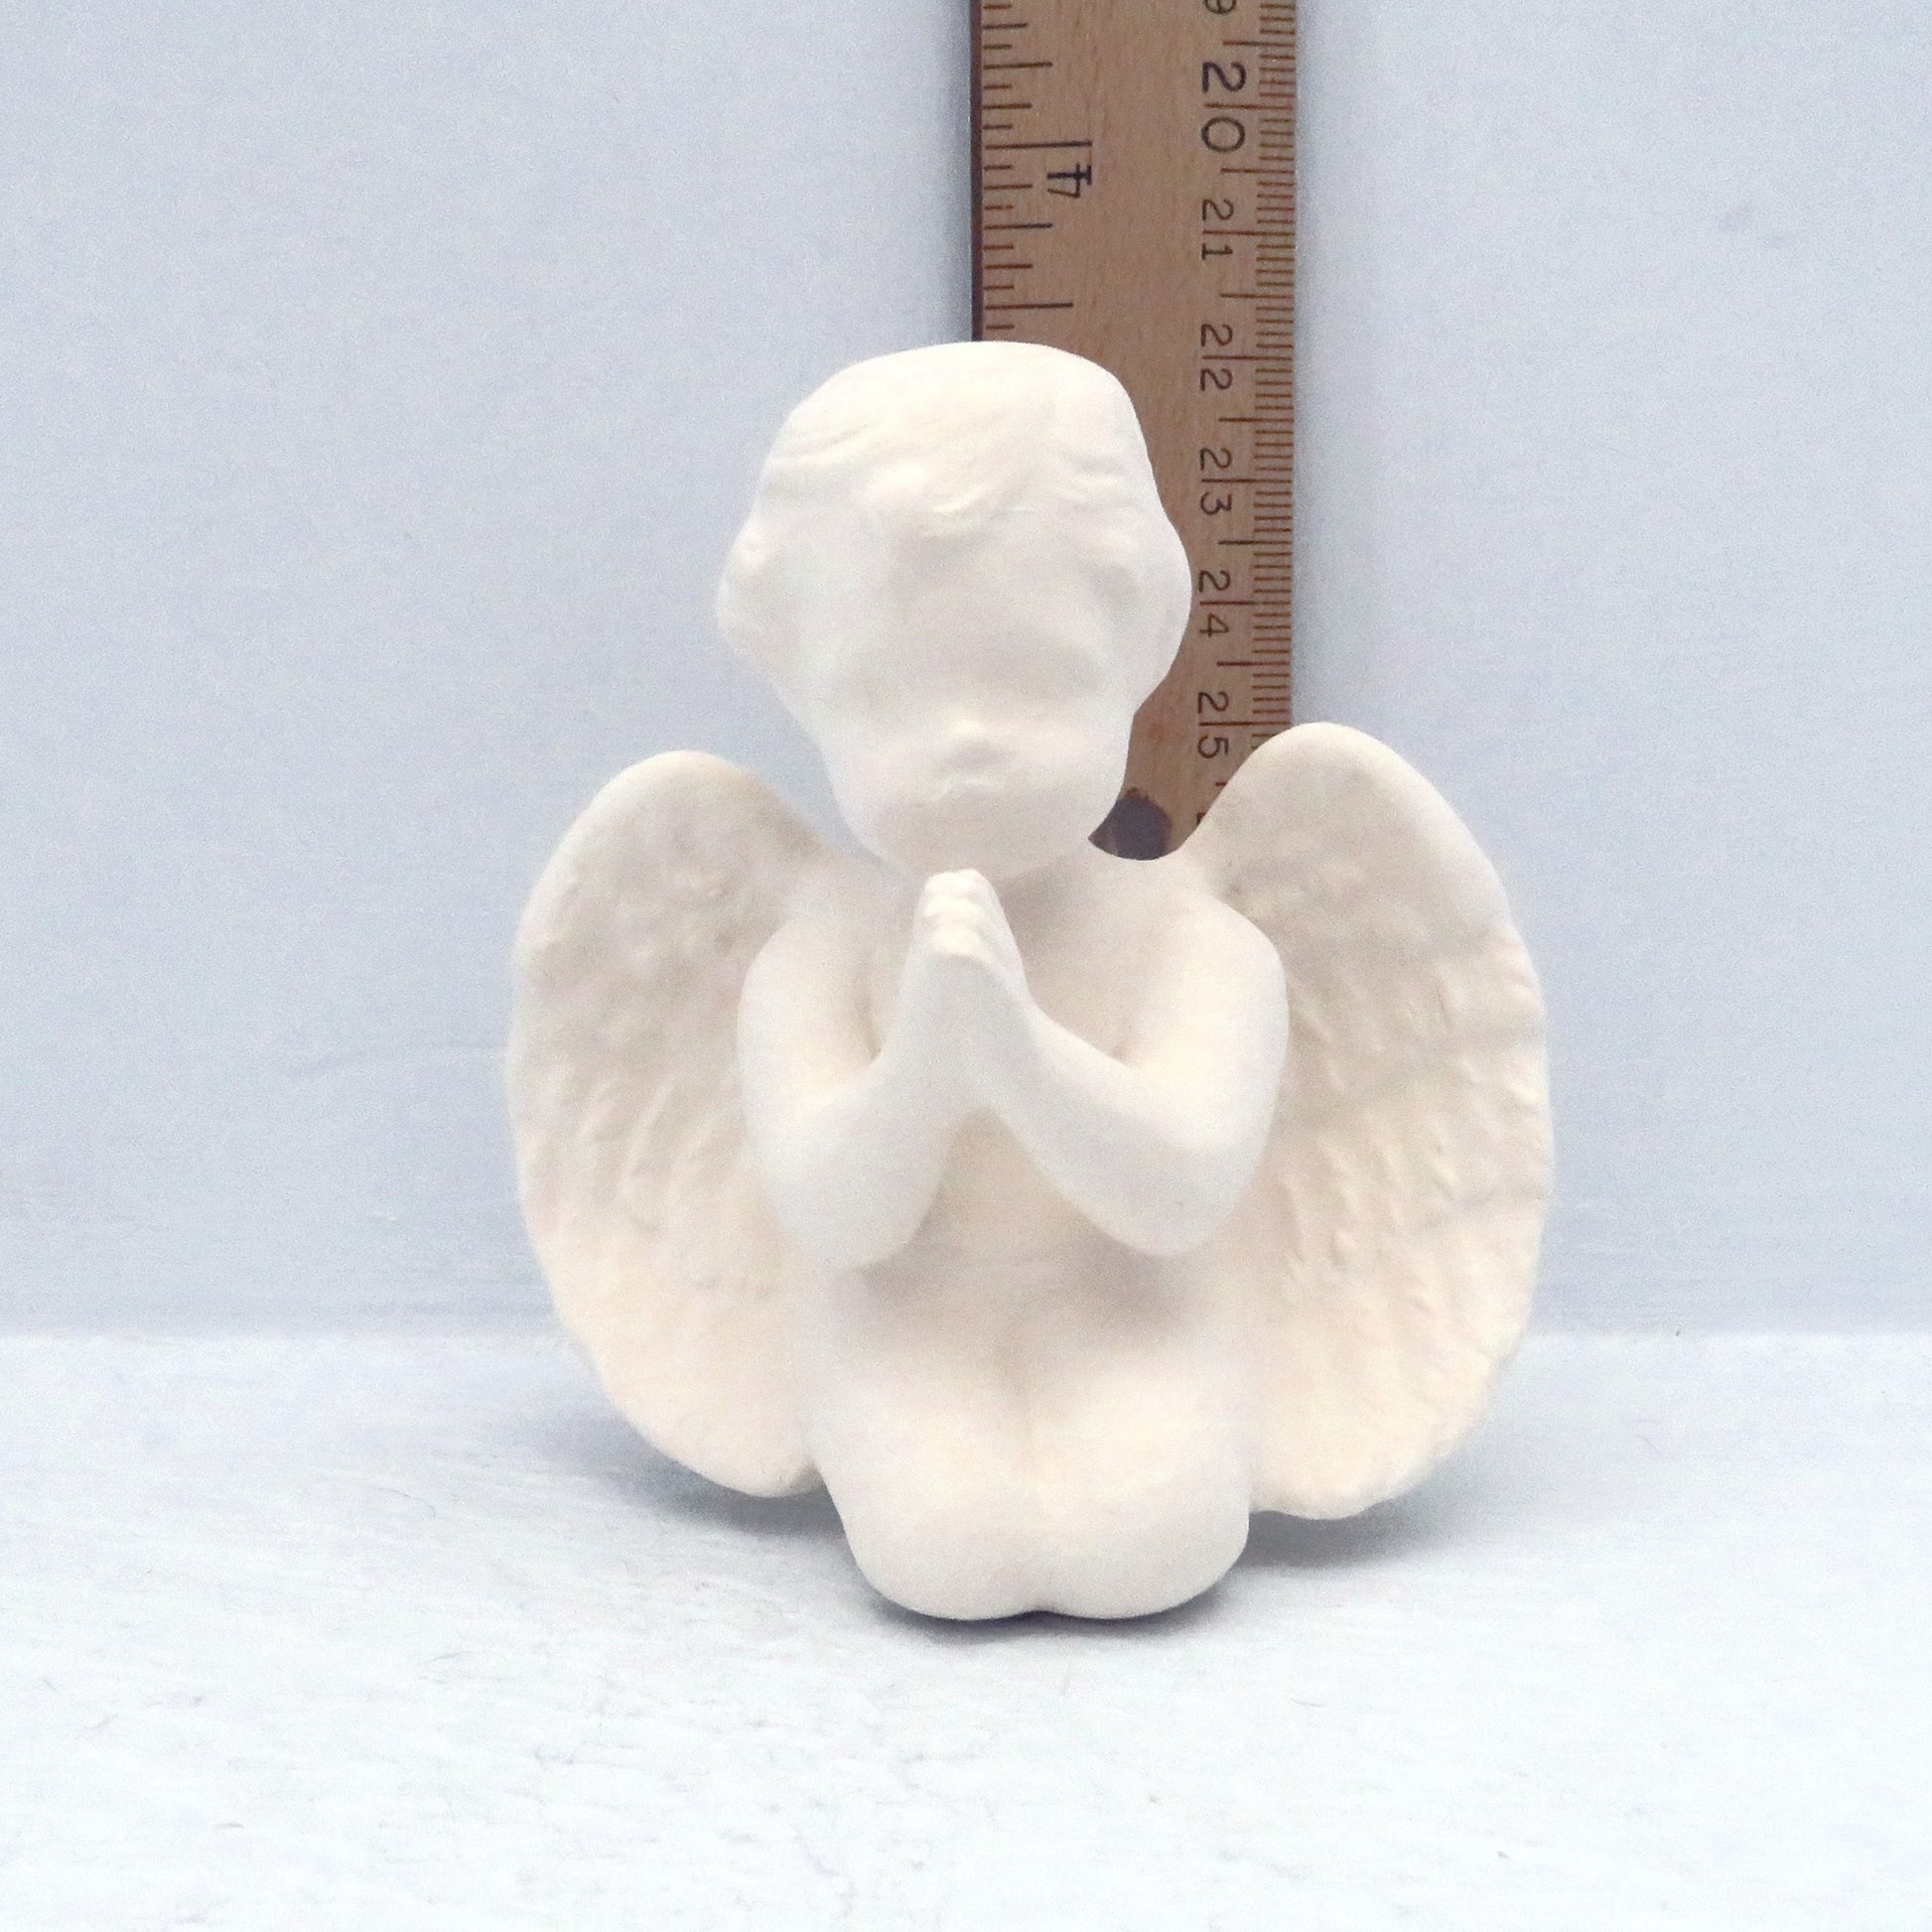 Ready to paint handmade ceramic cherub kneeling with hands folded in prayer position by a ruler showint it to be 3 1/4 inches tall